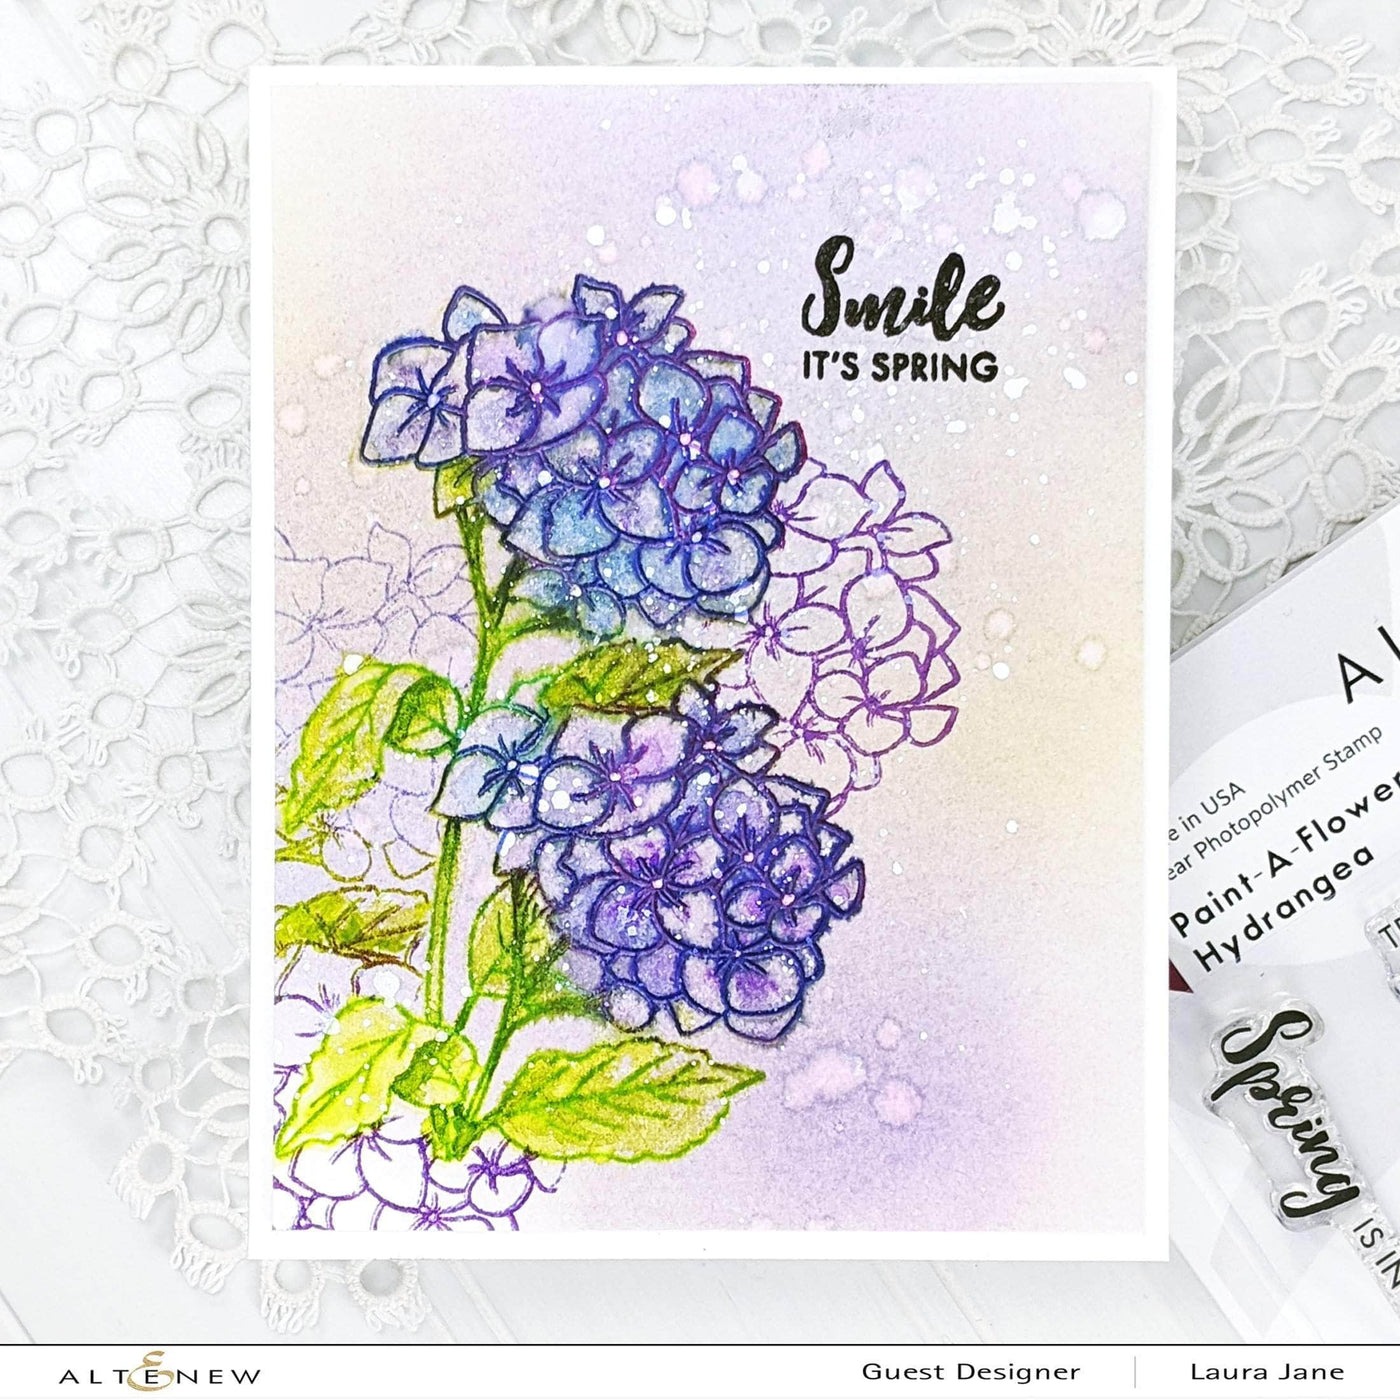 Clear Stamps Paint-A-Flower: Hydrangea Outline Stamp Set